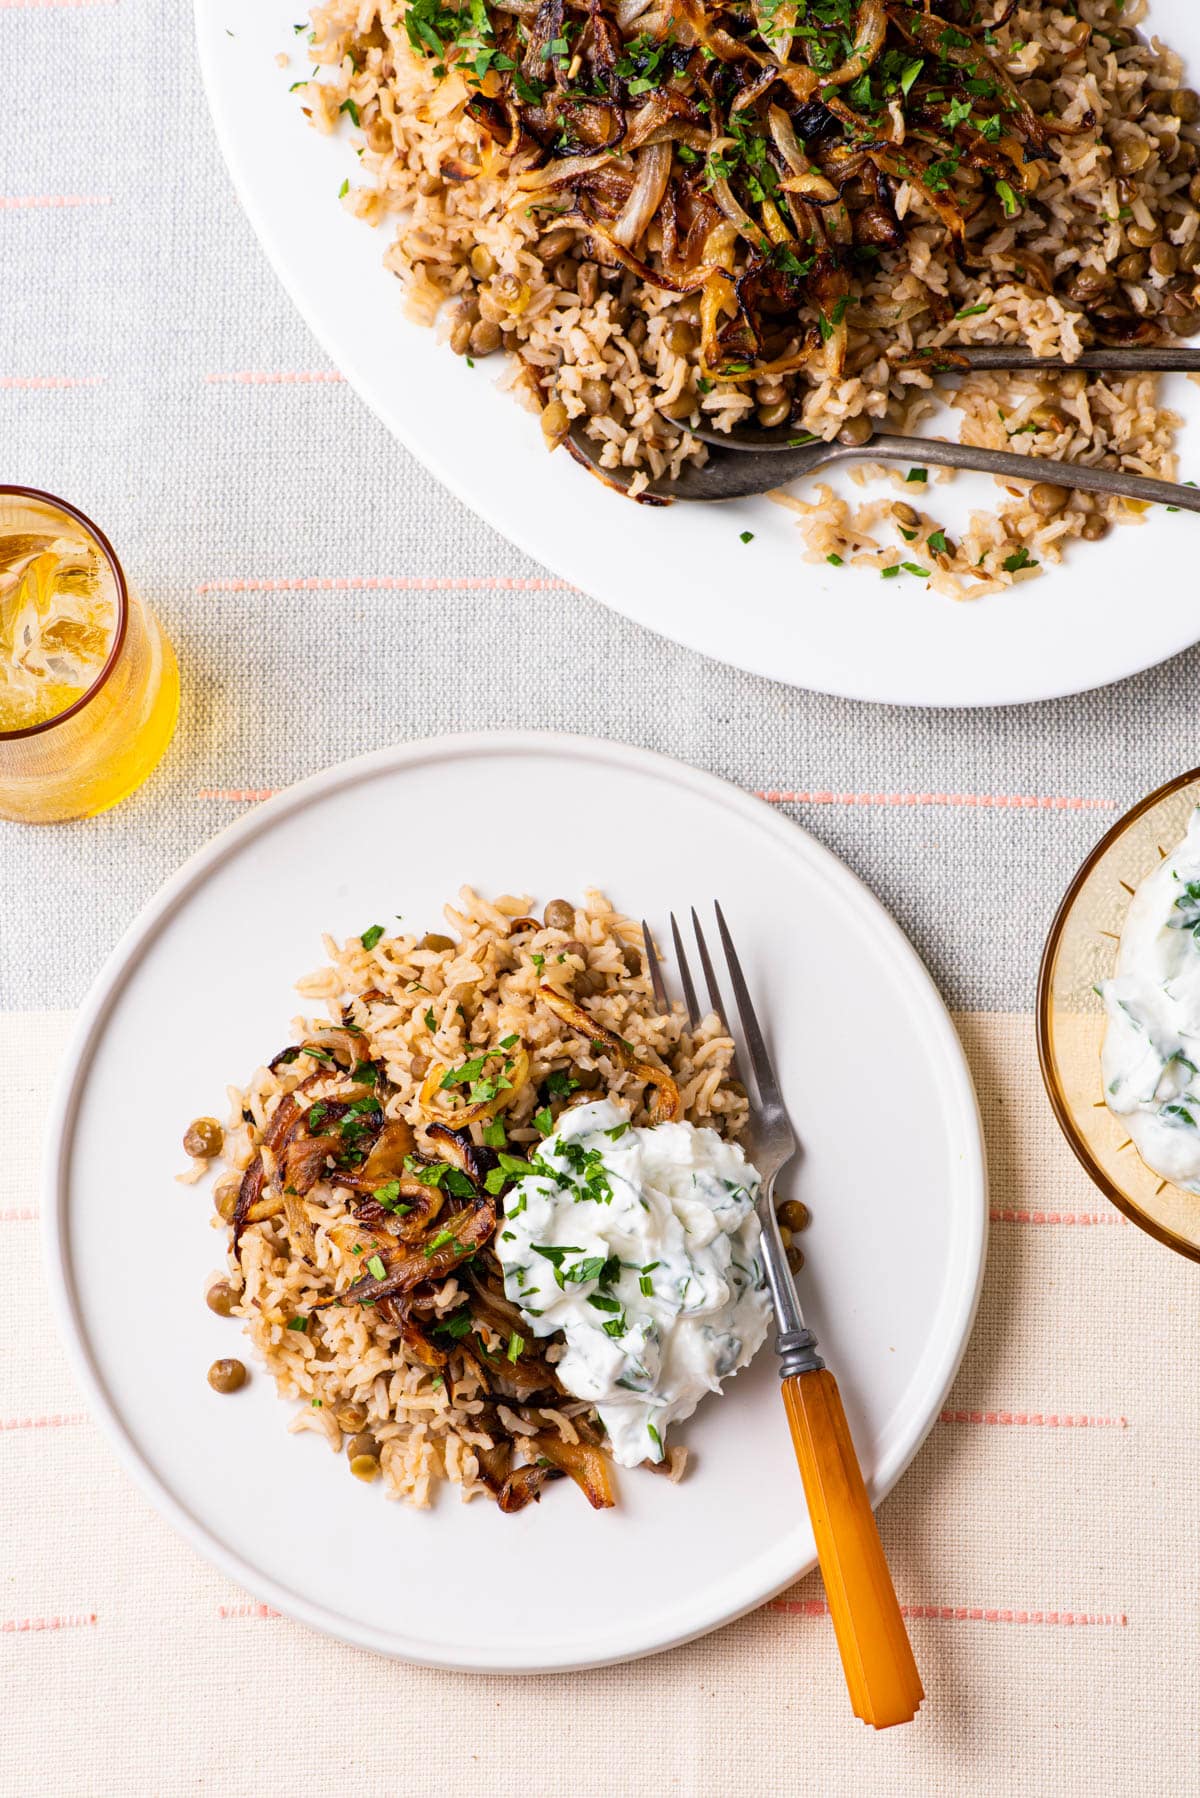 Middle Eastern Mujadara (brown rice and lentils with fried onions) on two white plates on a white table next to a yellow glass of water